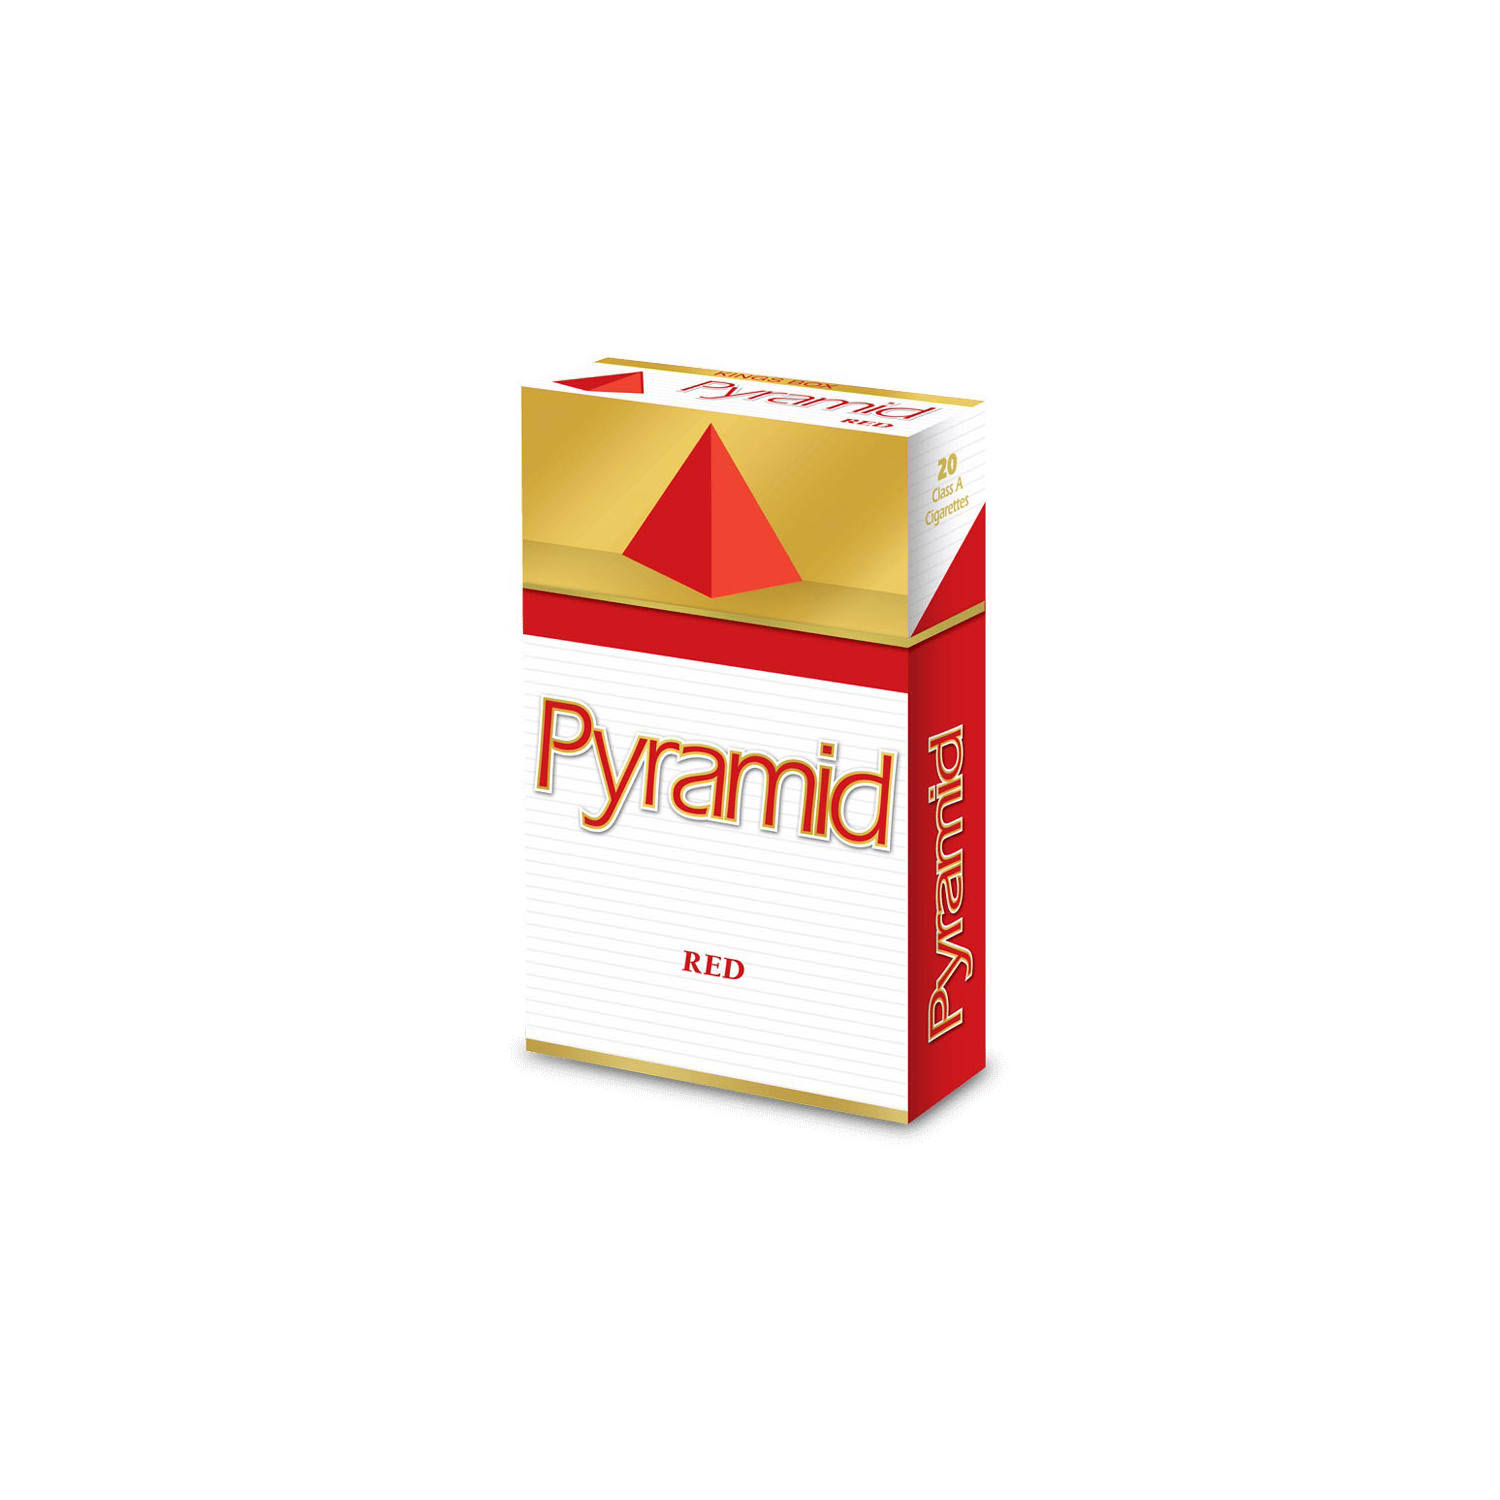 Pyramid Red BX kg 20 Count X10